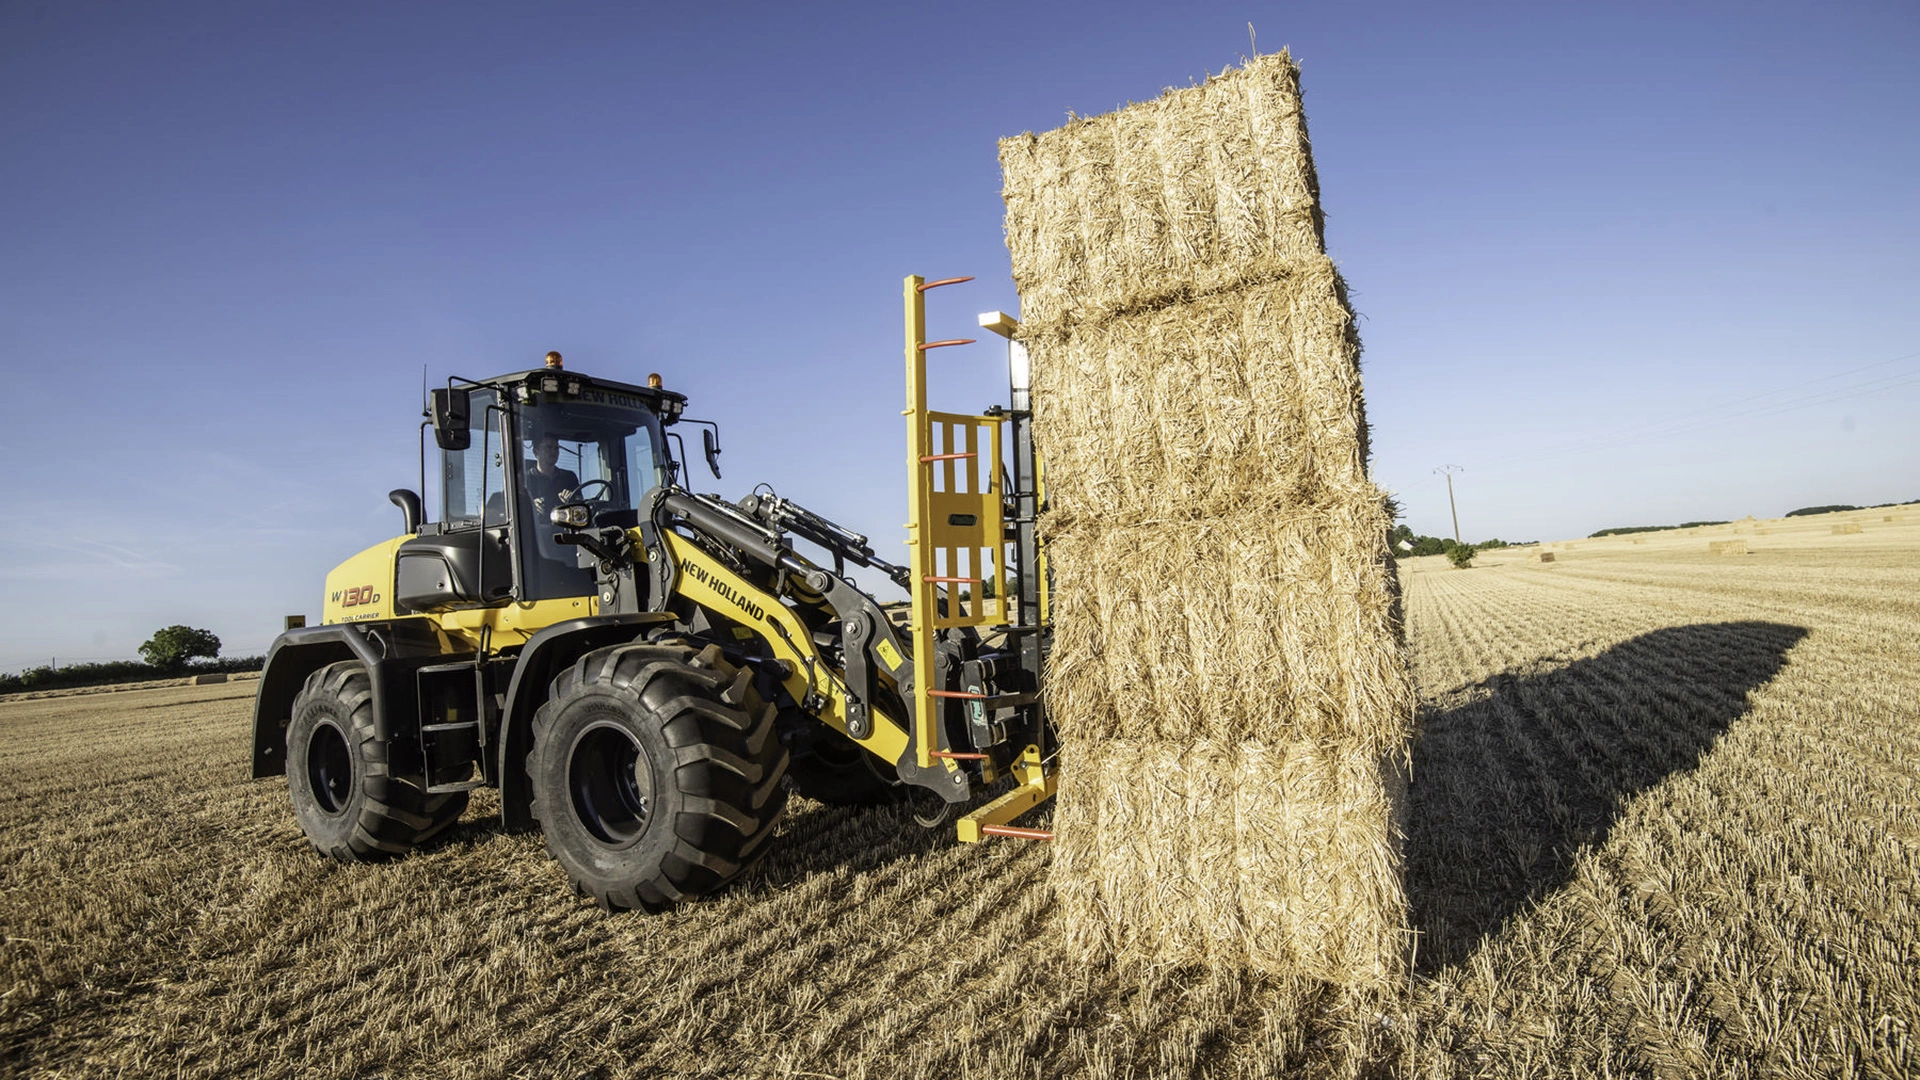 New Holland W130D wheel loader efficiently transporting a towering stack of hay bales .